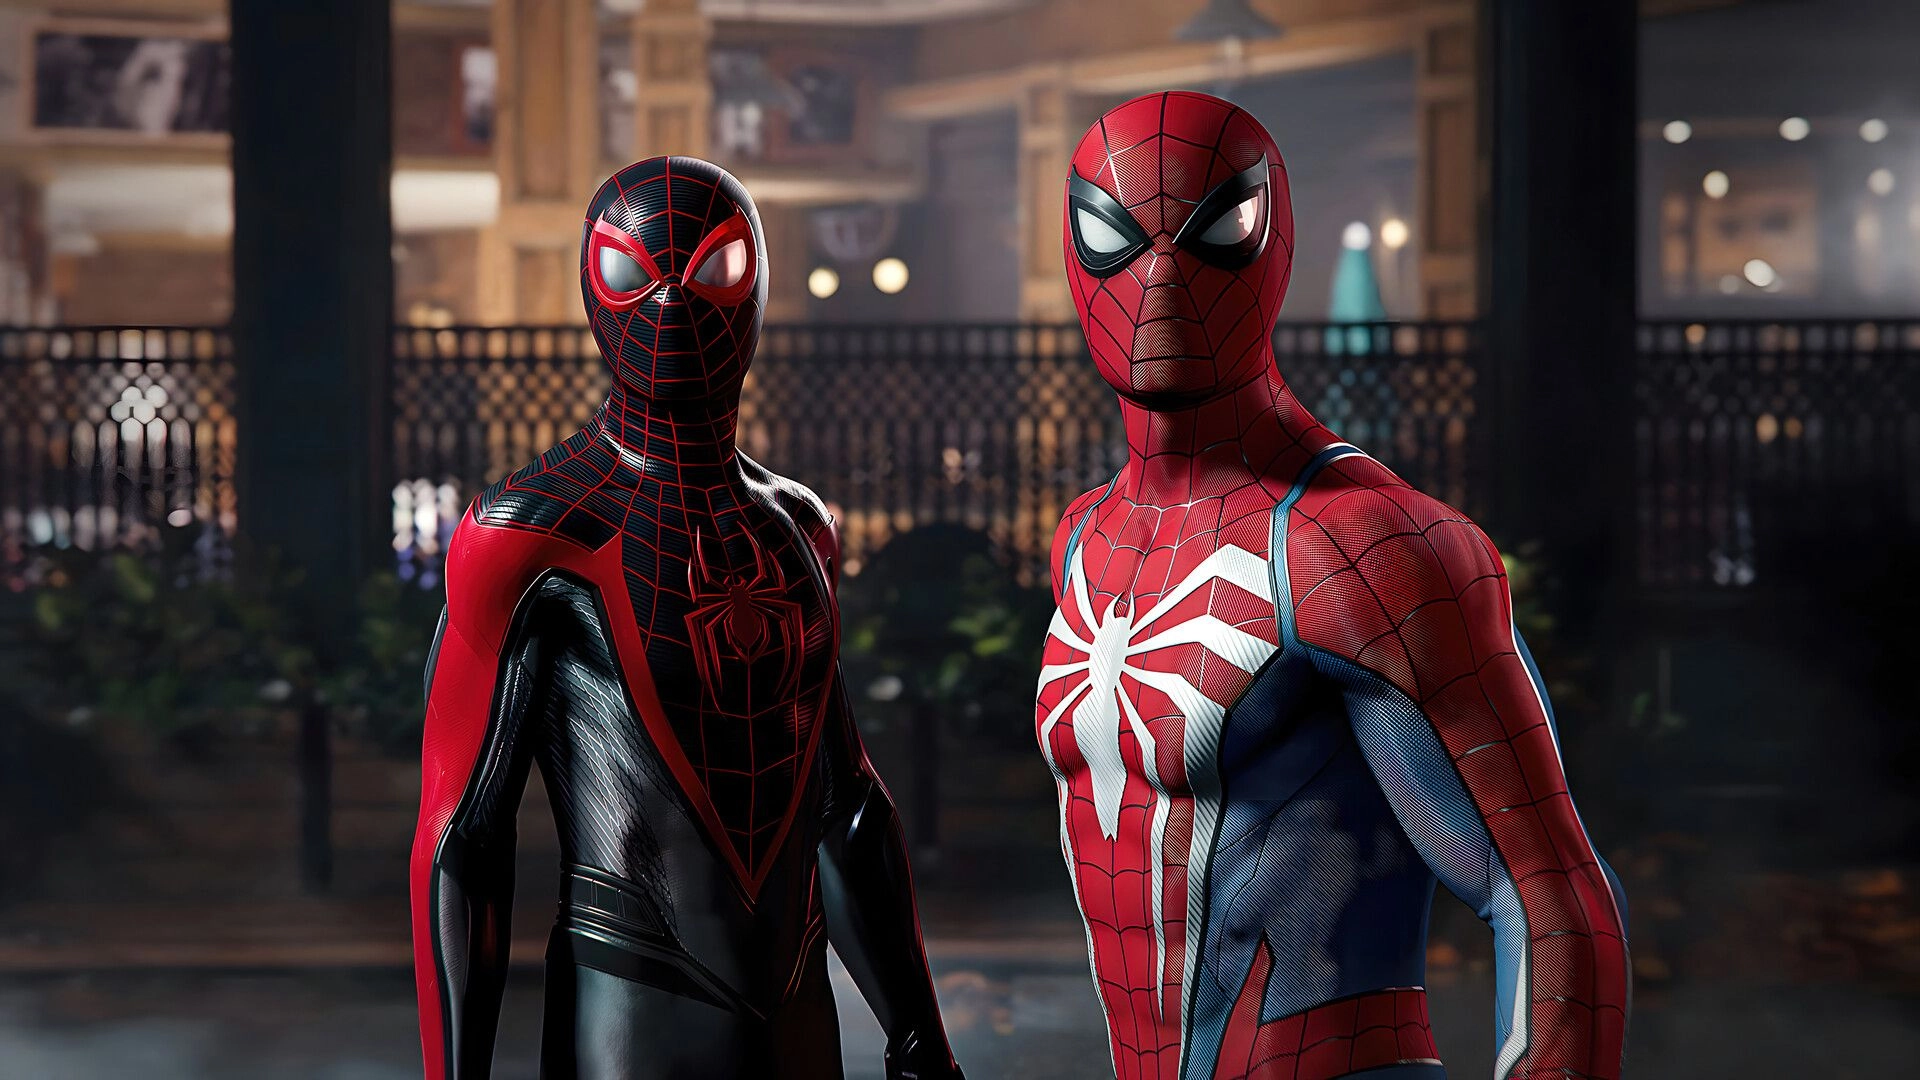 Quality Over Quantity: Marvel's Spider-Man 2 Game Philosophy